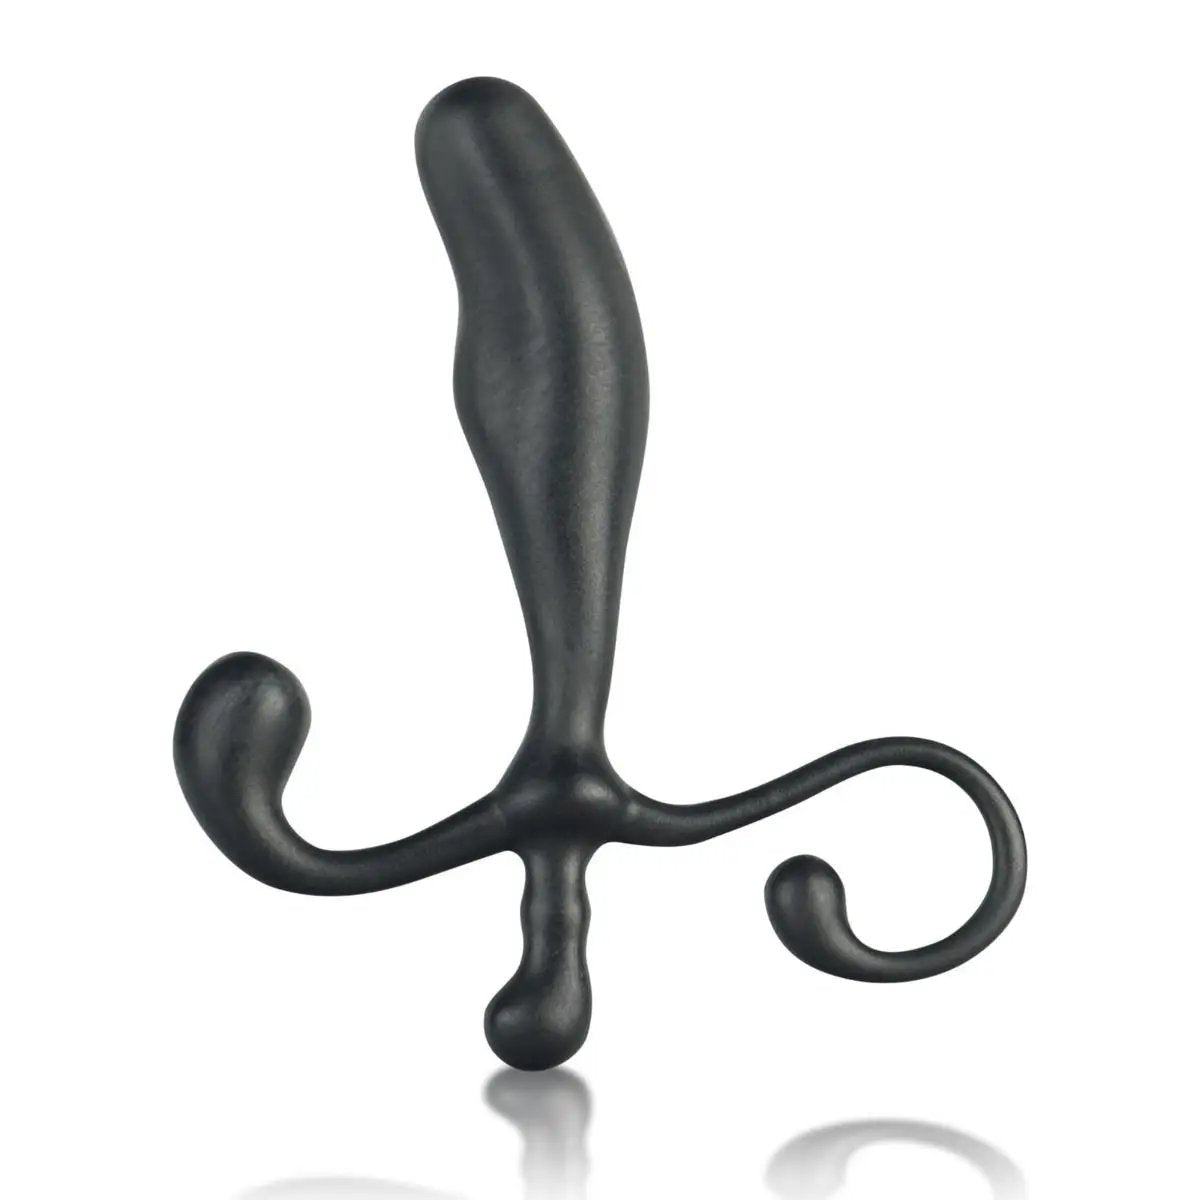 Front View Product Blue Line Male P-Spot Anal Massager Black 5 Inch - Simply Pleasure